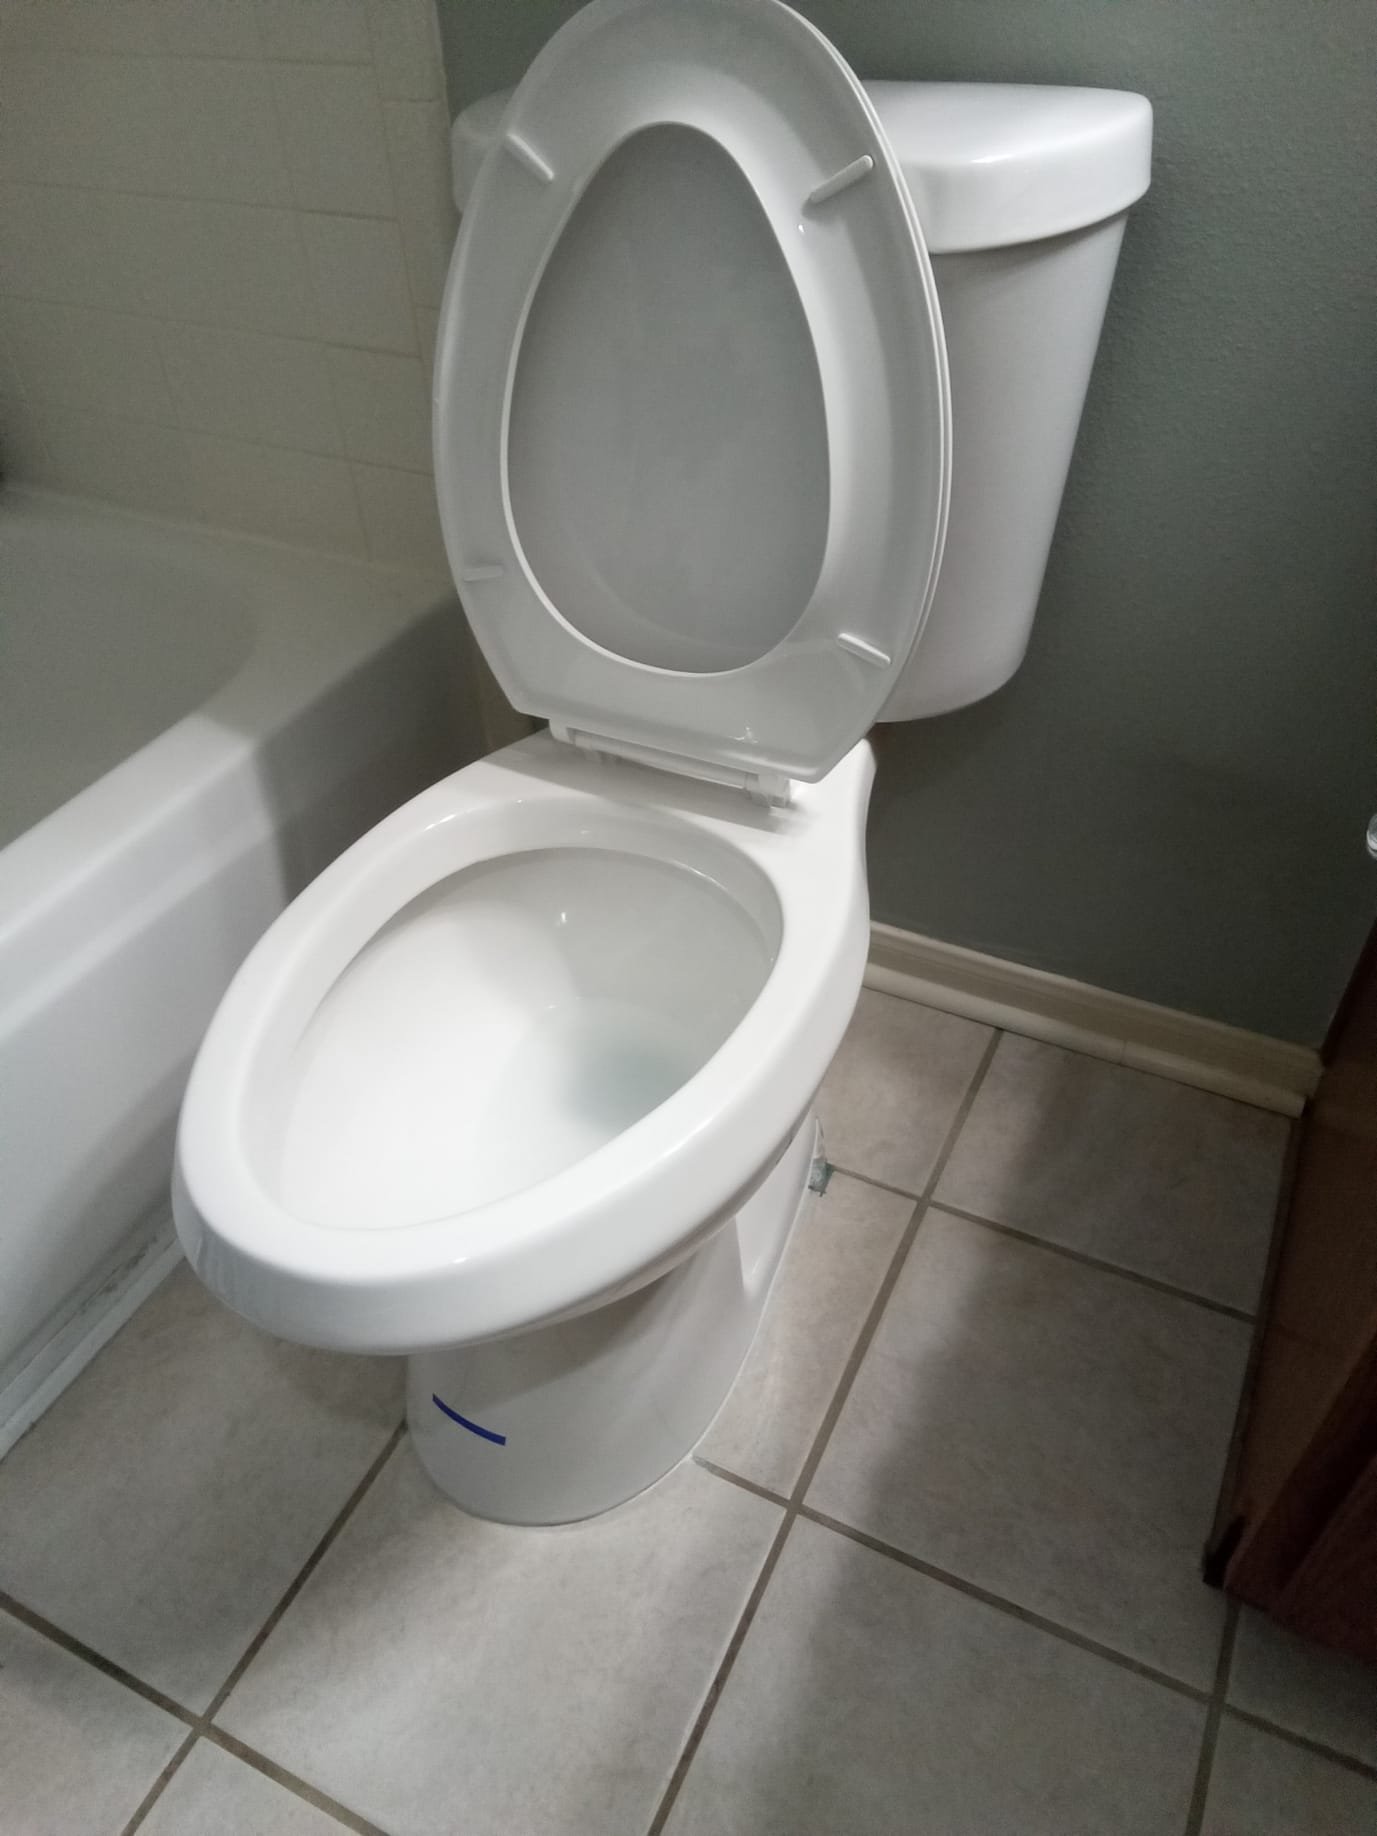 Fast & Reliable Toilet Repair and Installation in Houston, Texas